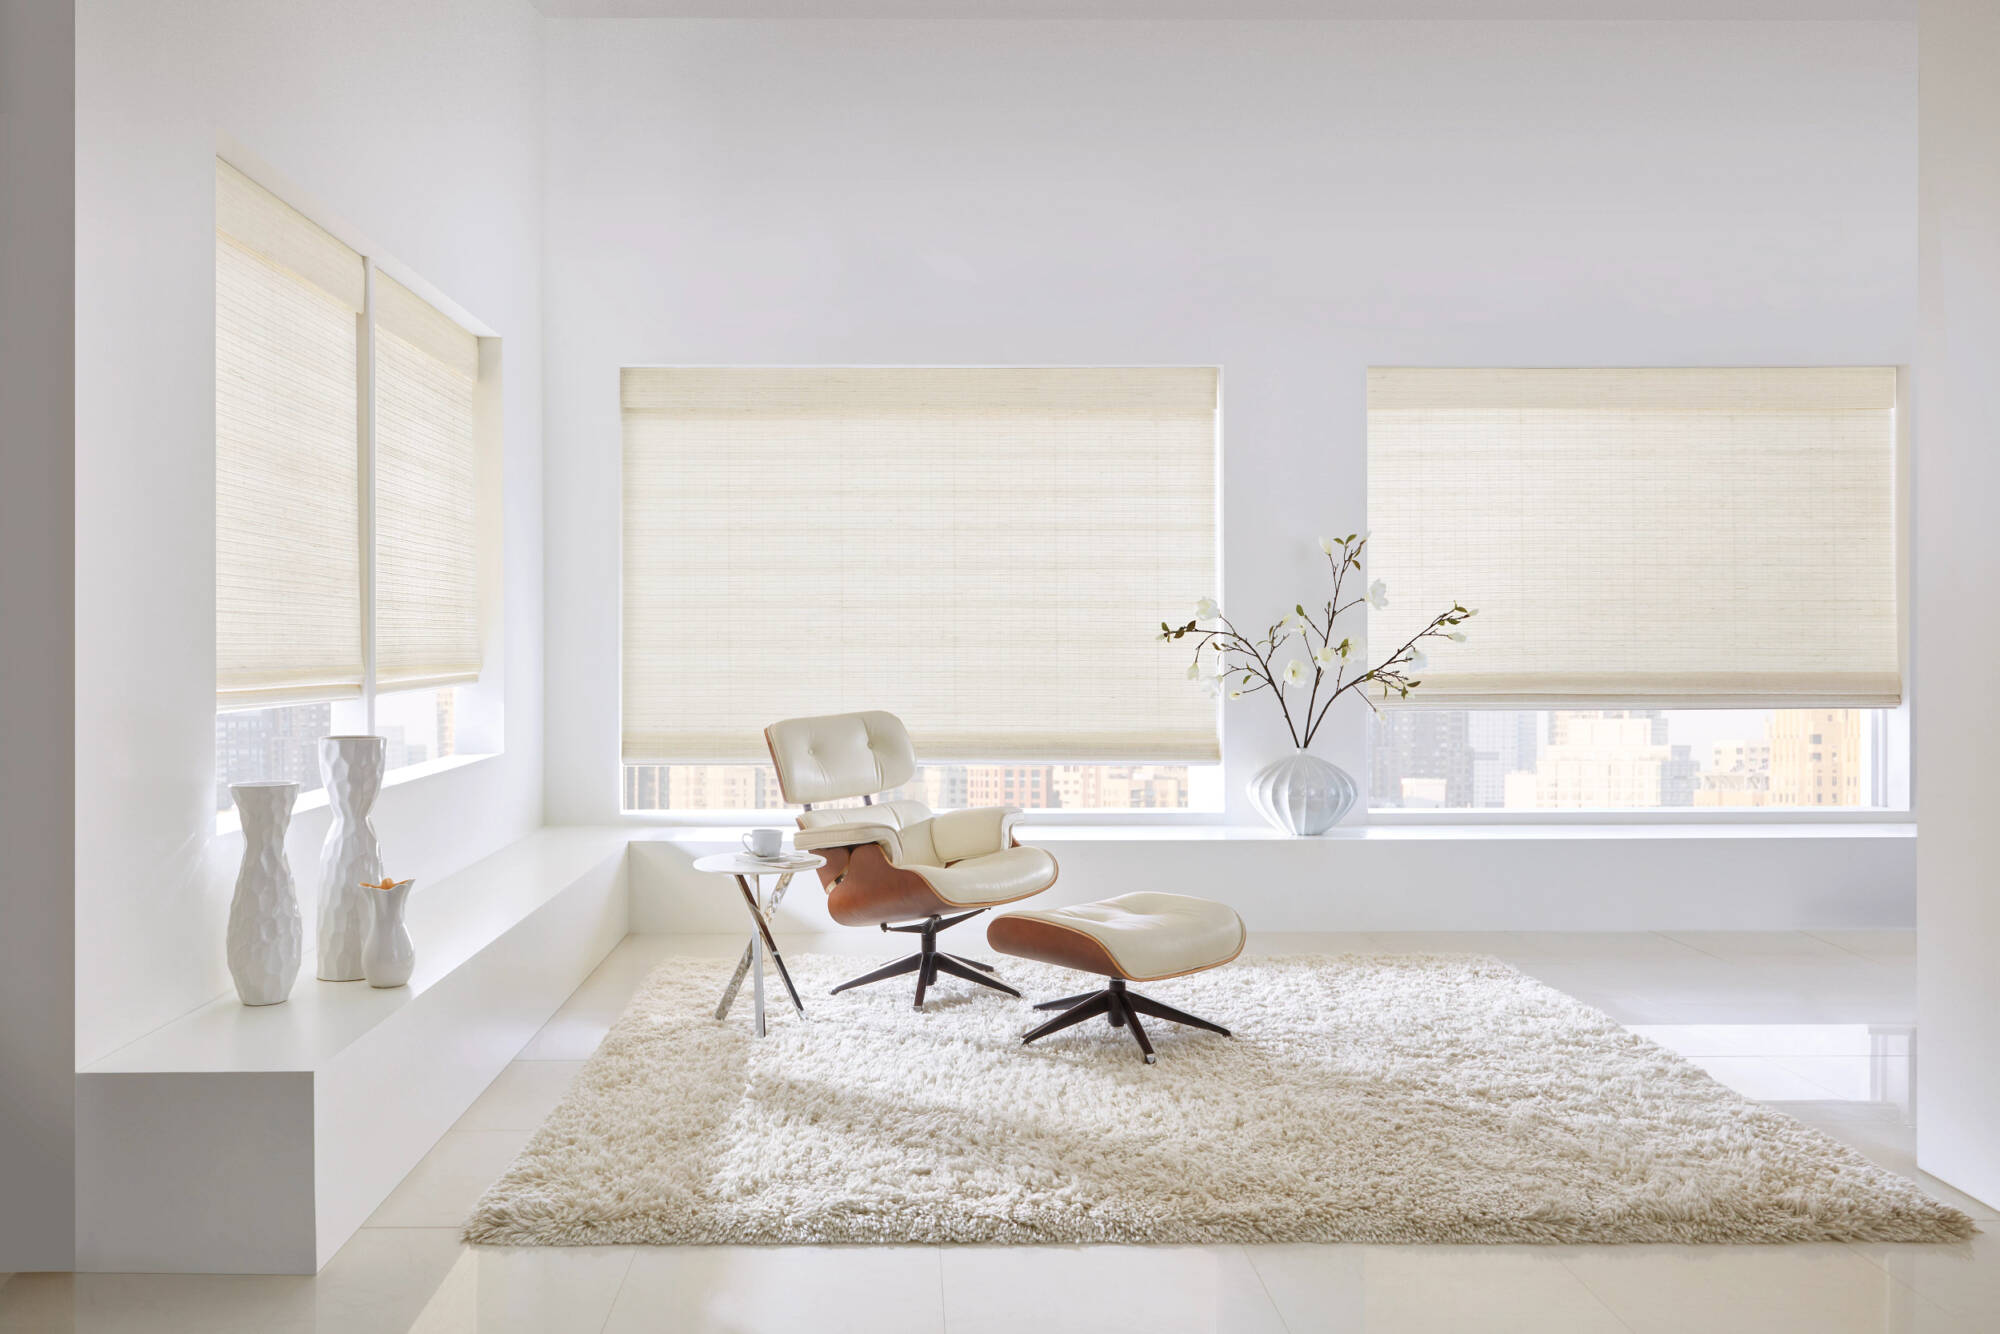 Insolroll Elements Decorative Roller Shades Zenith Blackout fabric